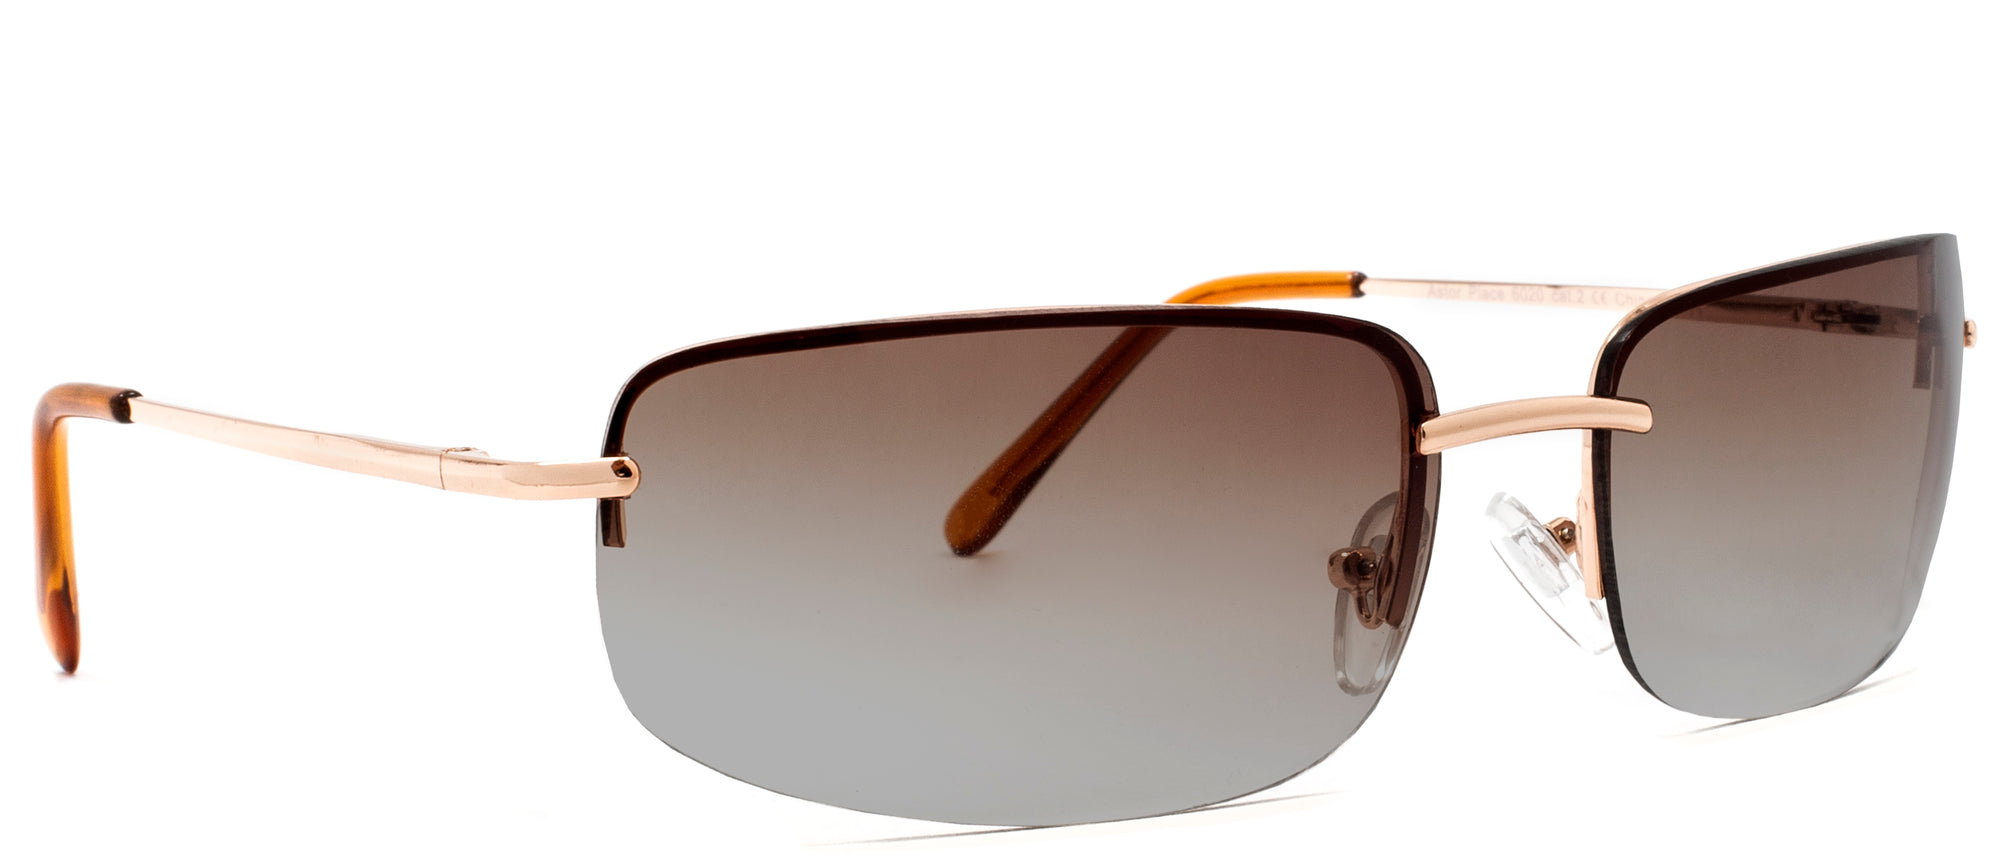 Astor Place - Sunglasses NYS Collection Eyewear Gold/Brown